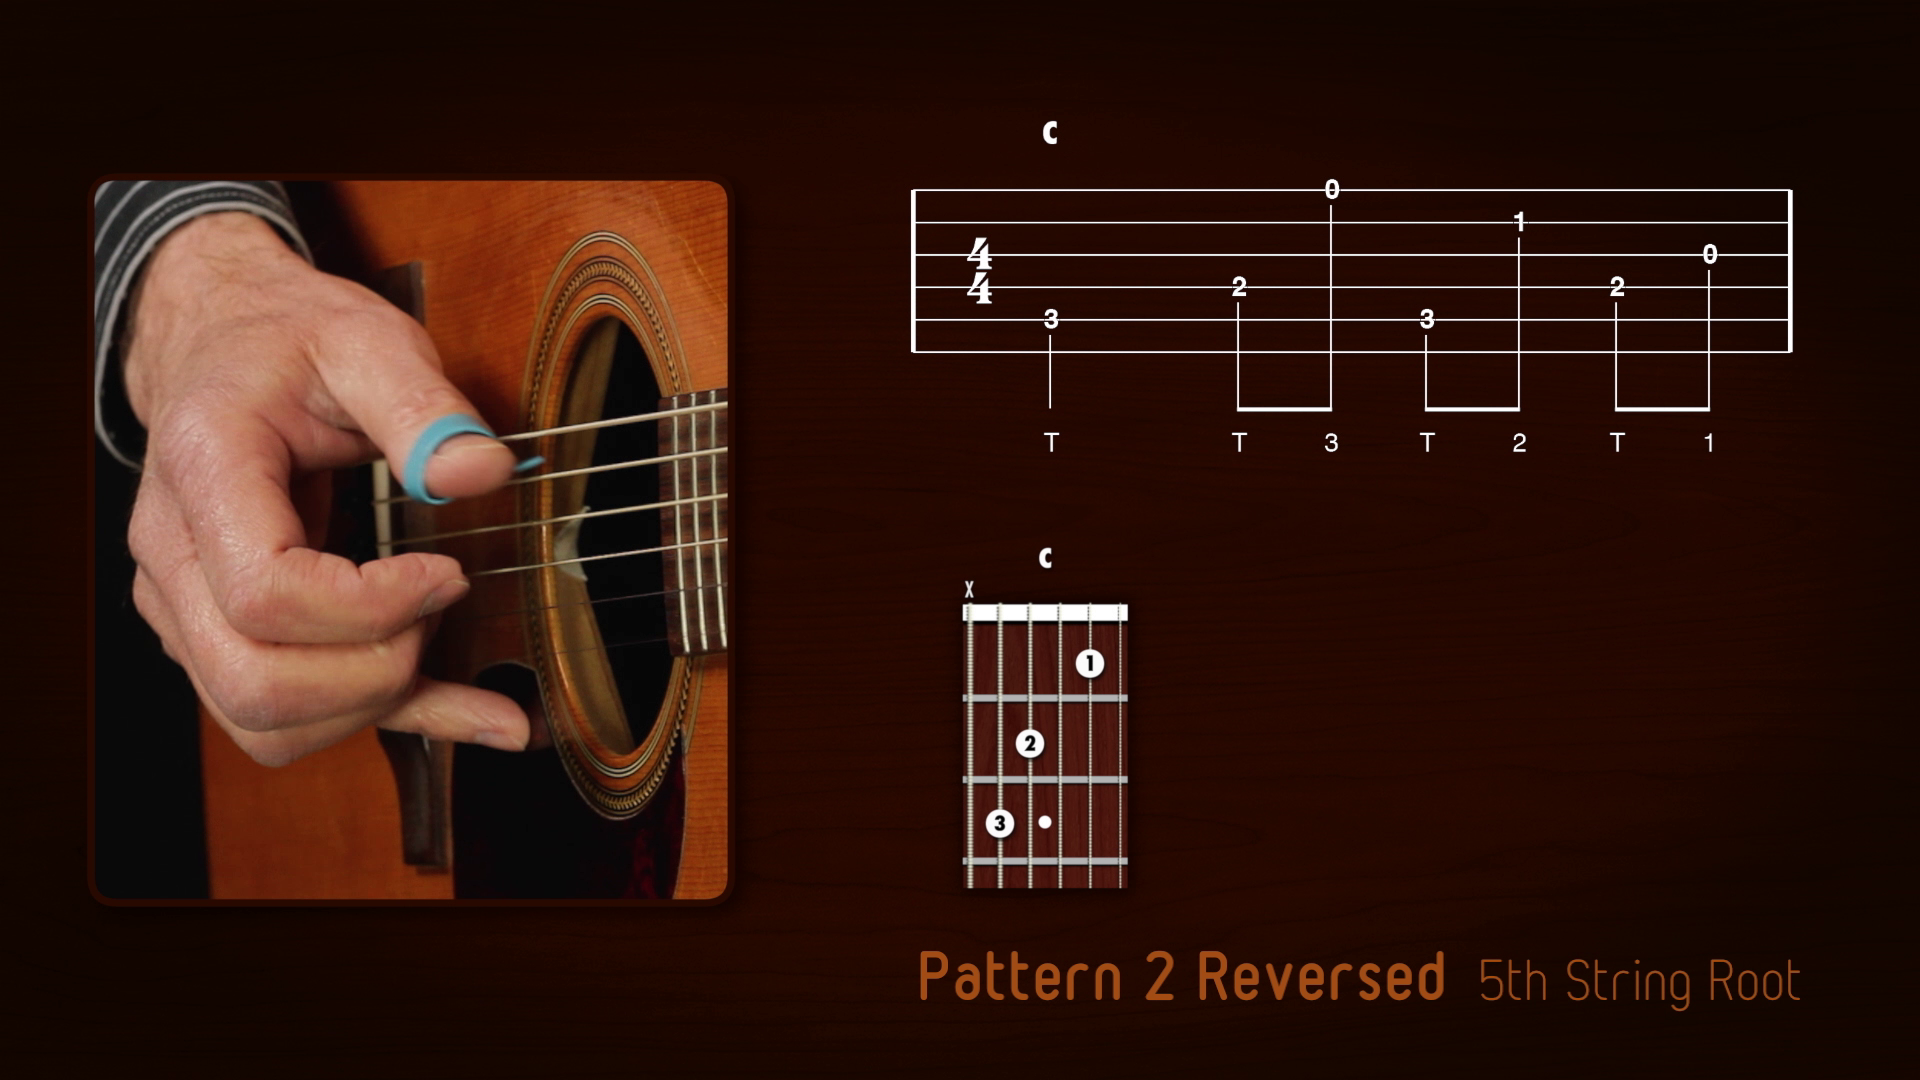 Taylor Carr Media, Training, Ray Bell FingerStyle Guitar Workshop Lesson 3, Portfolio Image, Note by Note Instruction